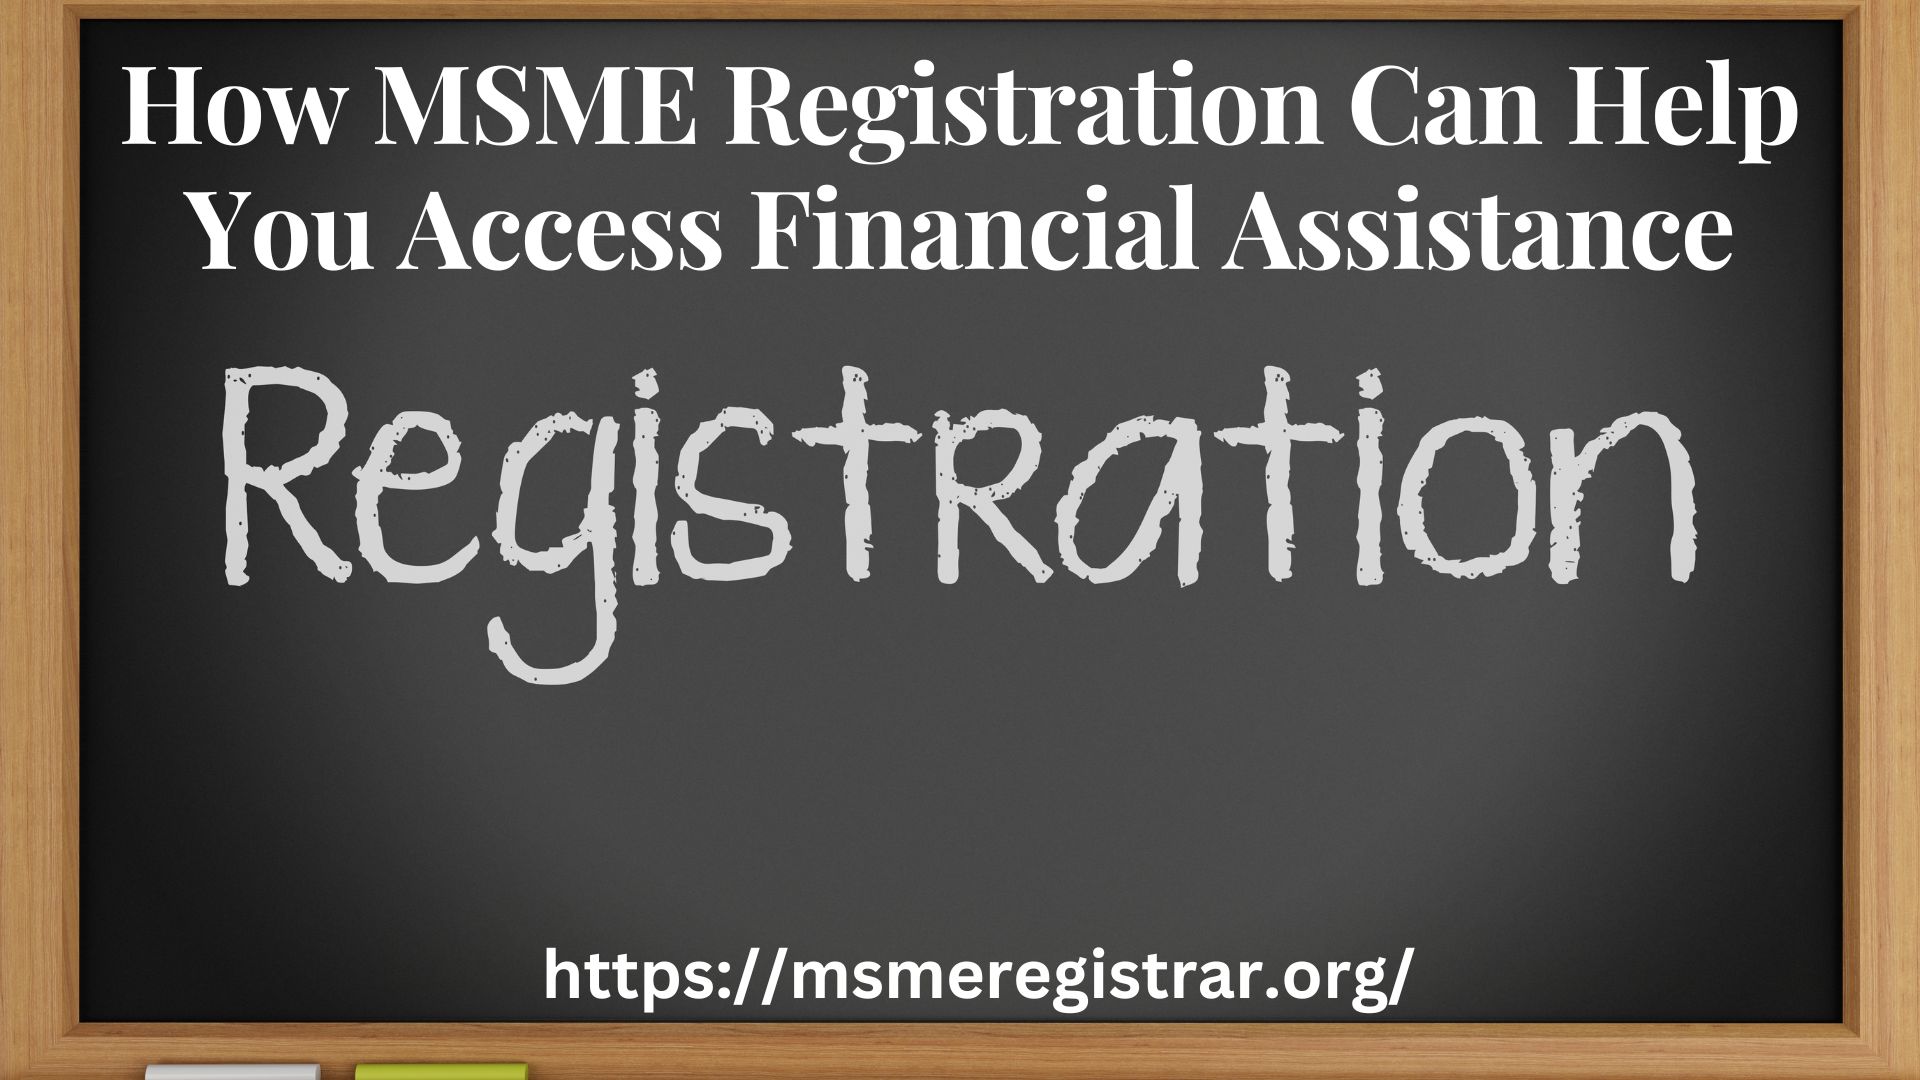 How MSME Registration Can Help You Access Financial Assistance